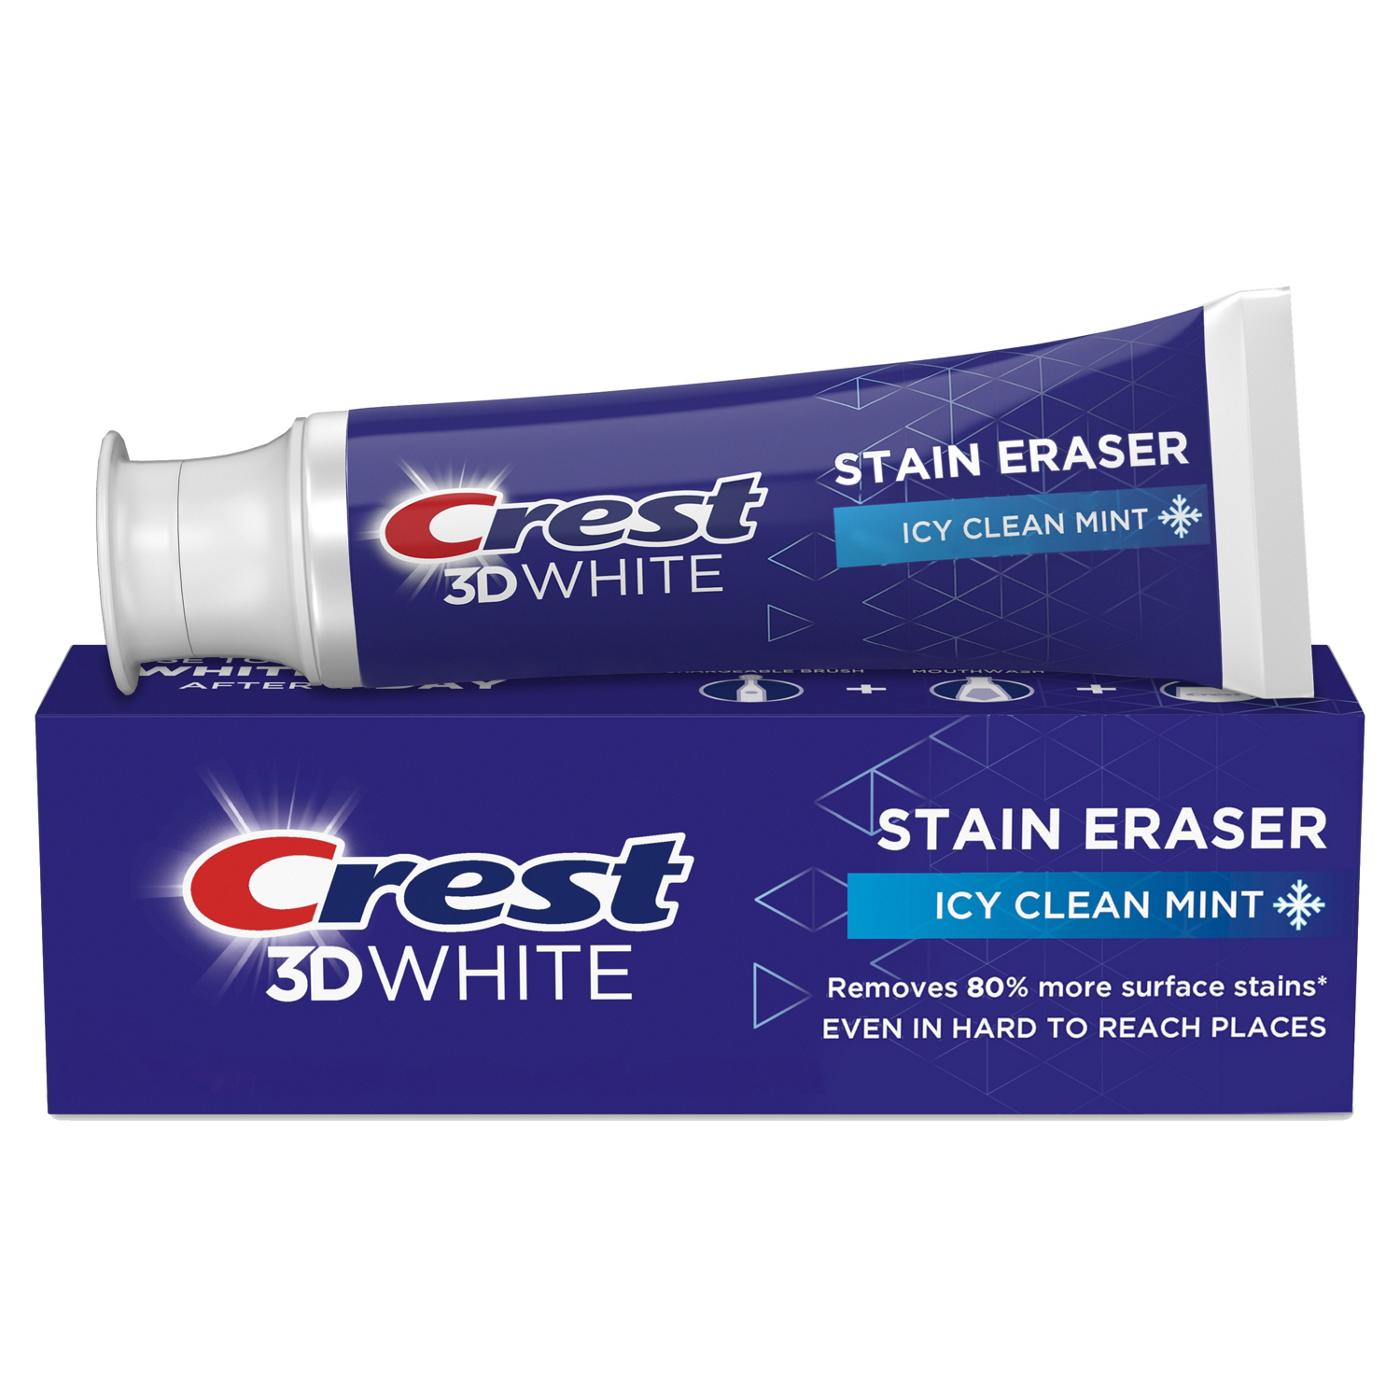 Crest 3D White Stain Eraser Toothpaste - Icy Clean Mint; image 6 of 6